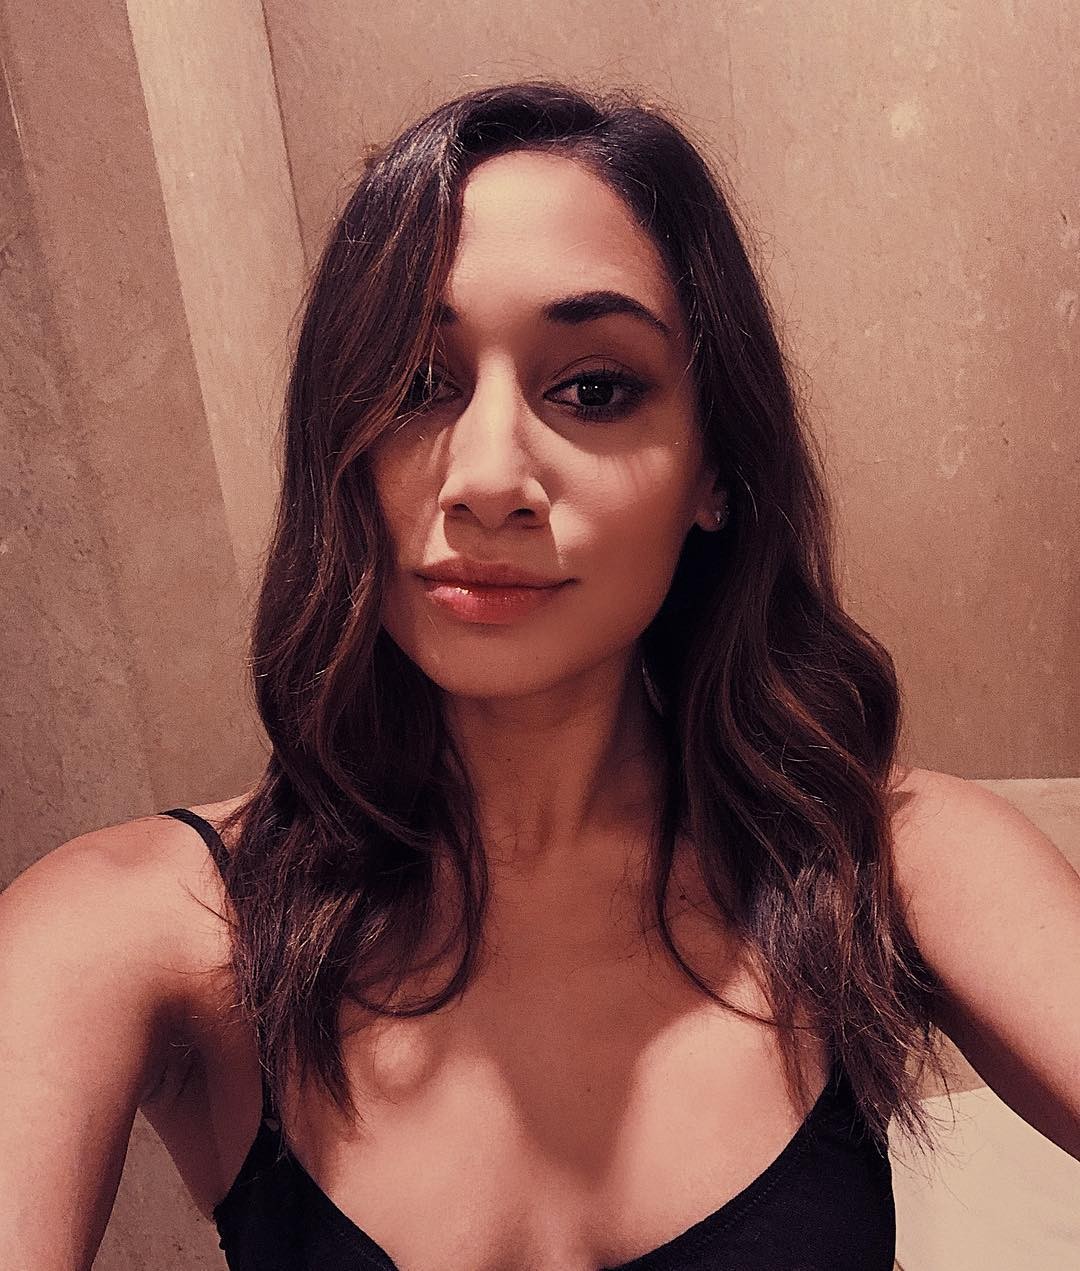 Meaghan Rath Topless Sexy TheFappeningPro 5 - Meaghan Rath Topless And Sexy (13 Photos)